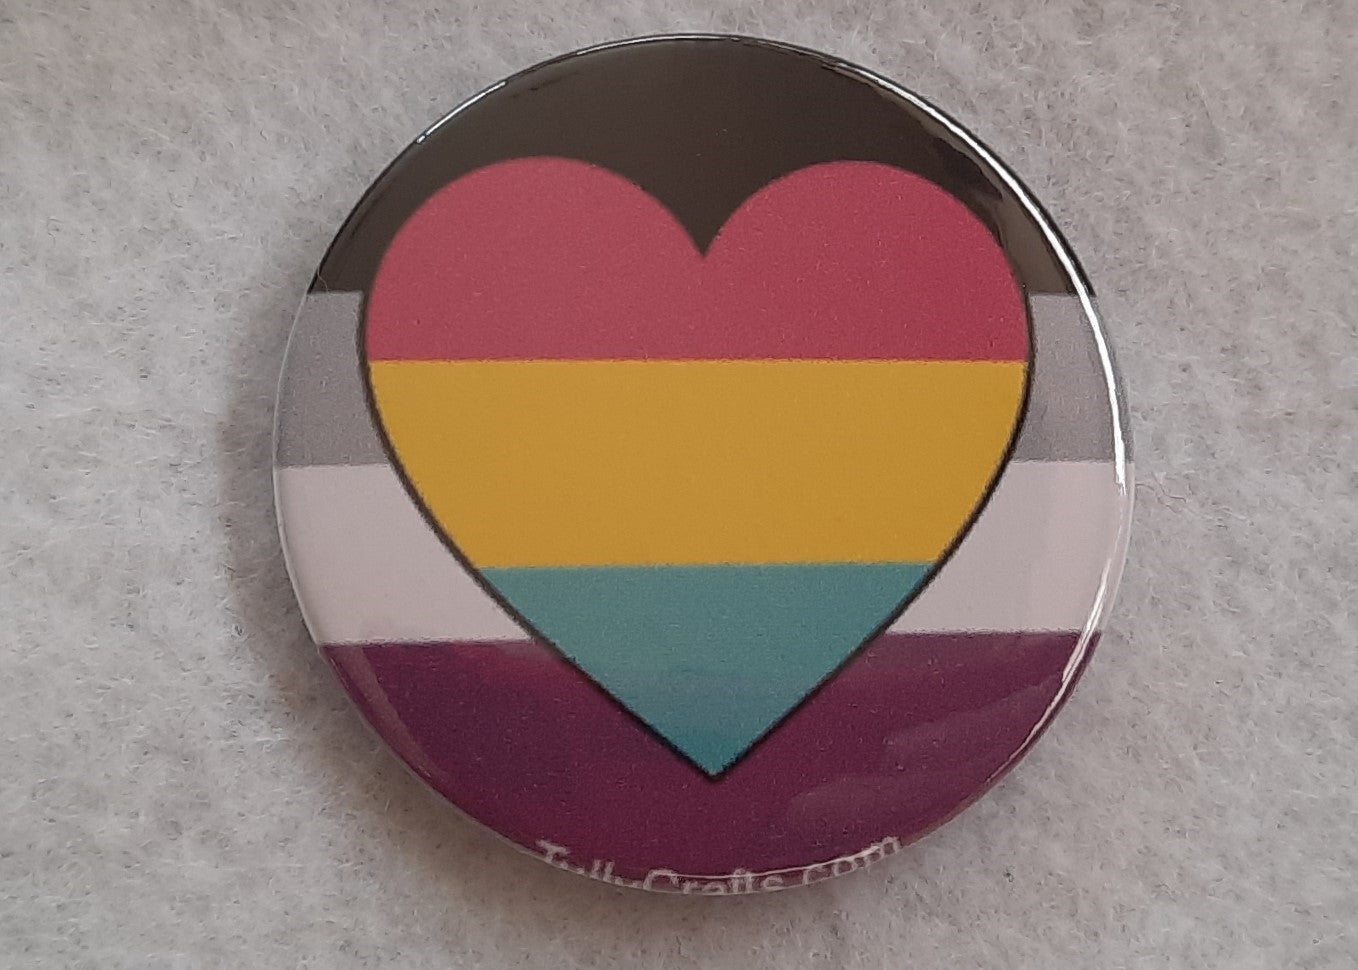 Asexual Panromantic Pride Flag Badge - Tully Crafts